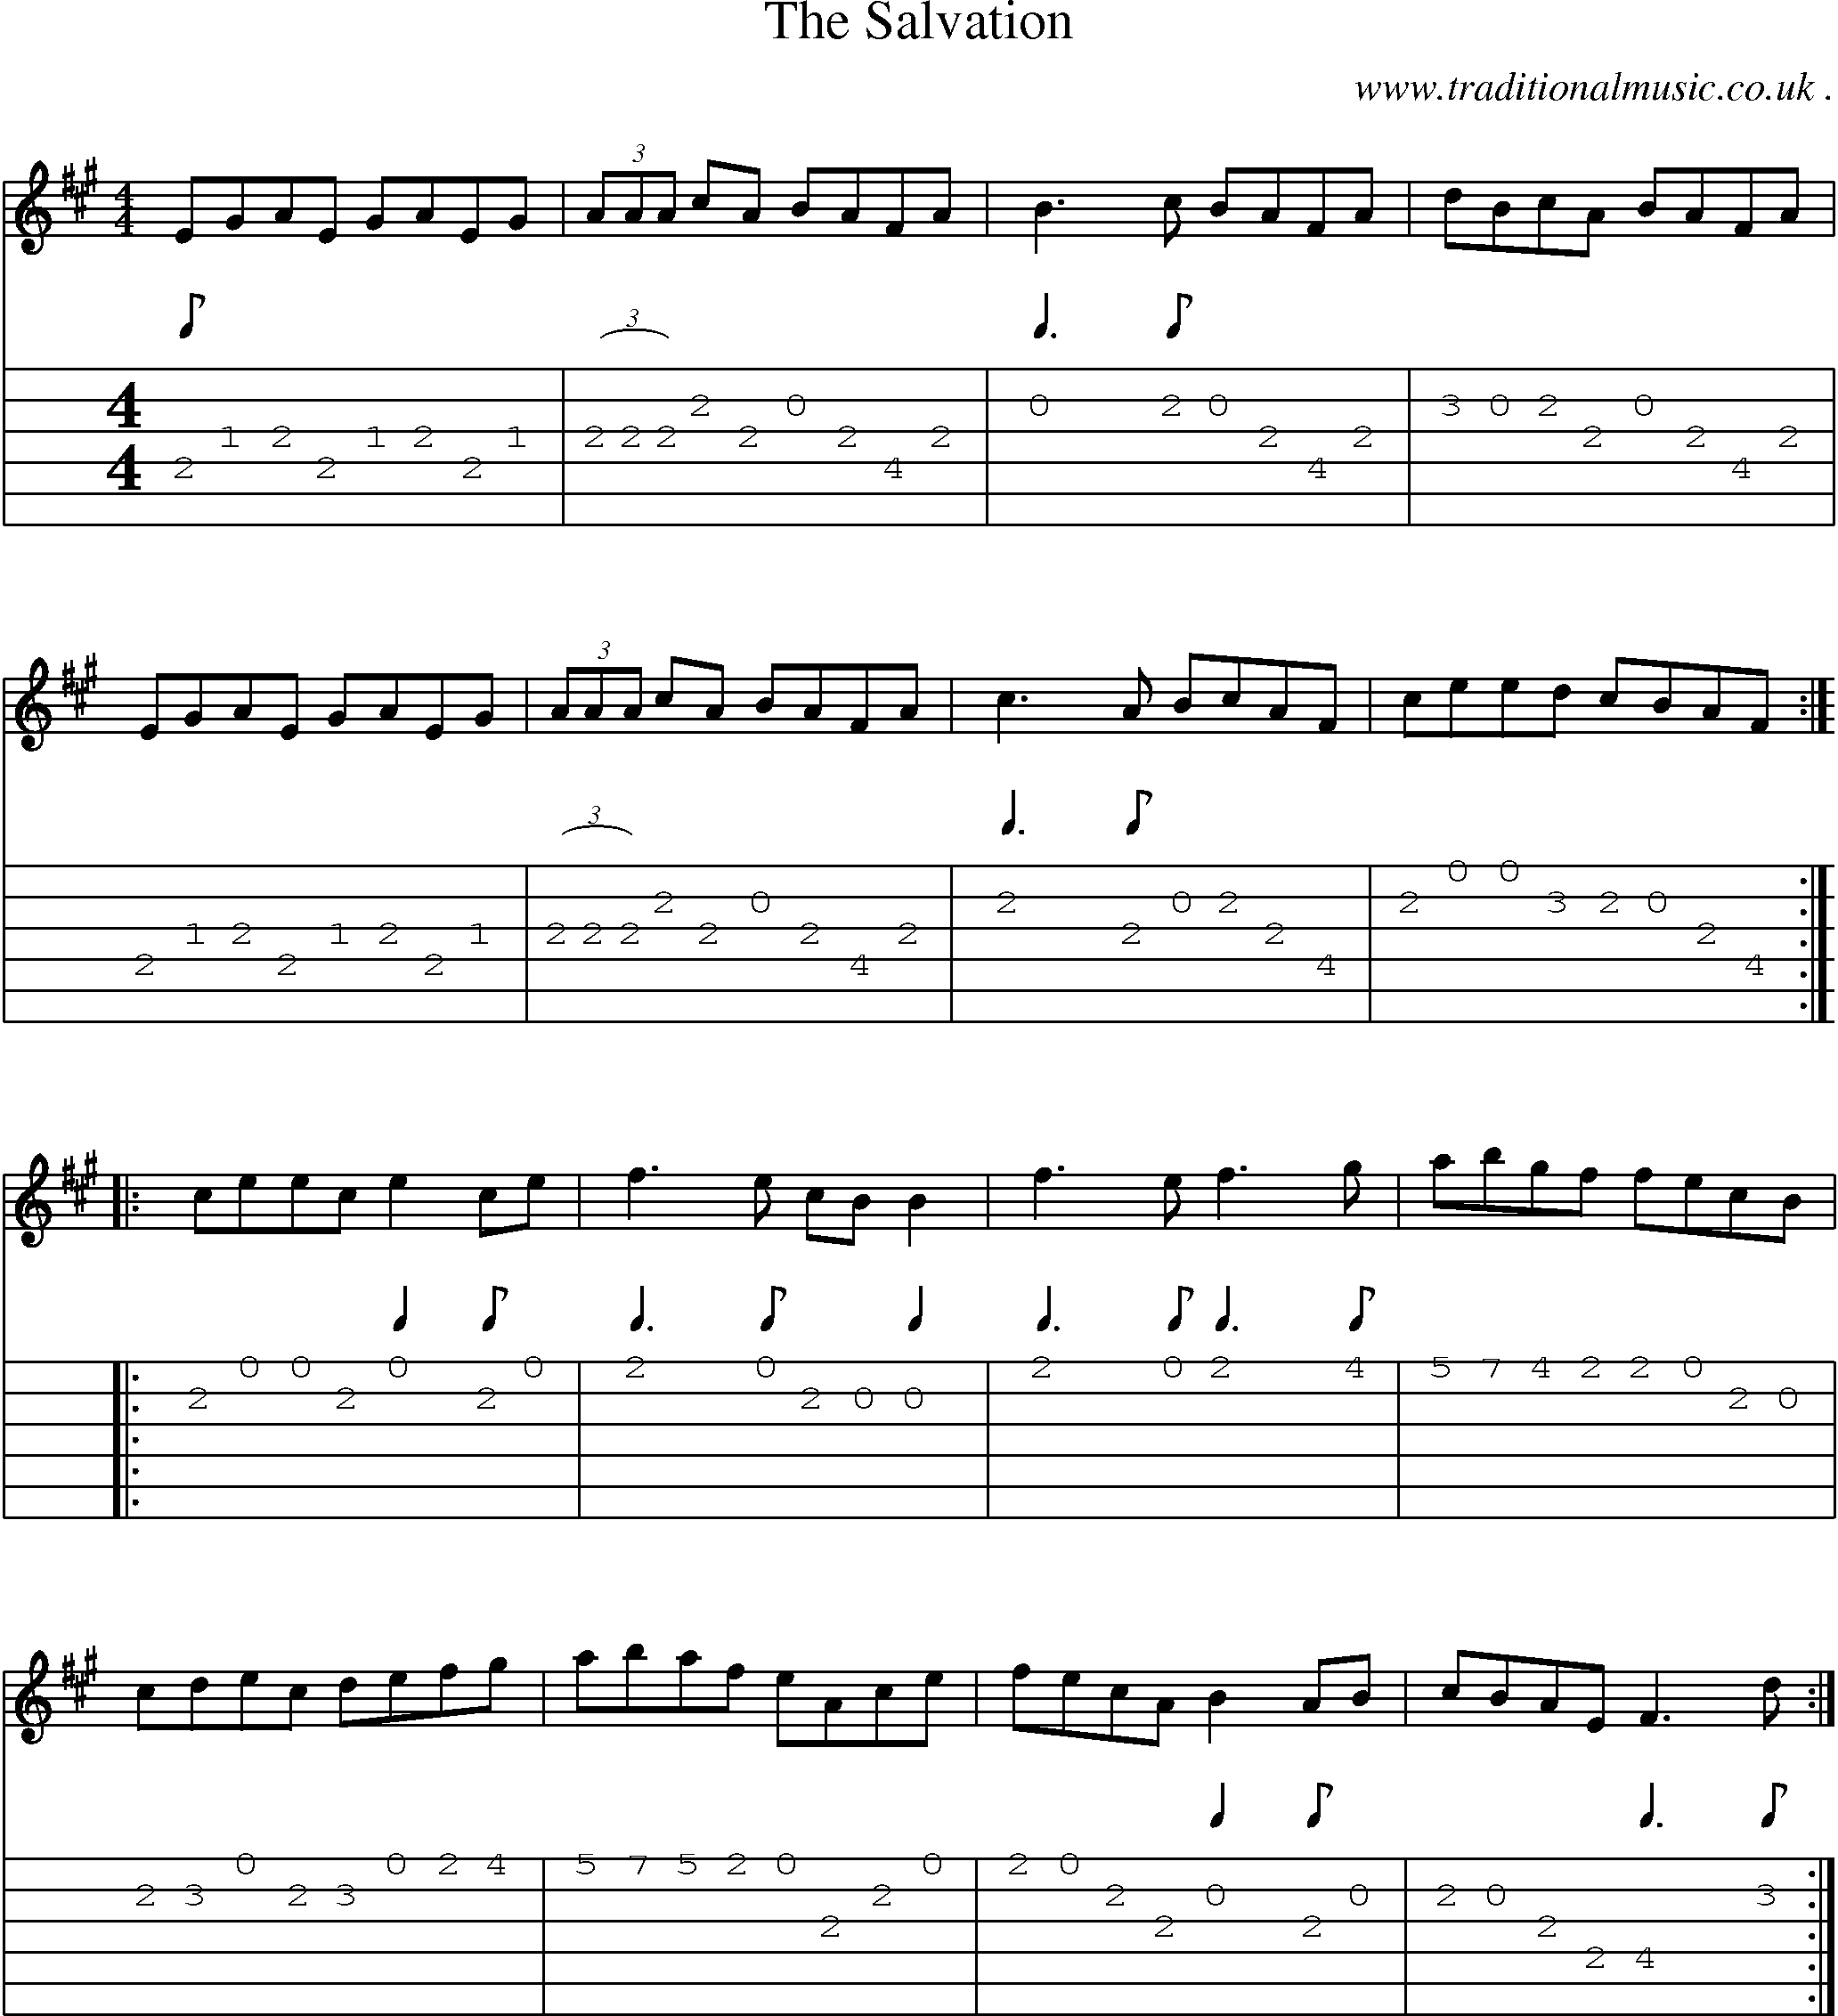 Sheet-Music and Guitar Tabs for The Salvation